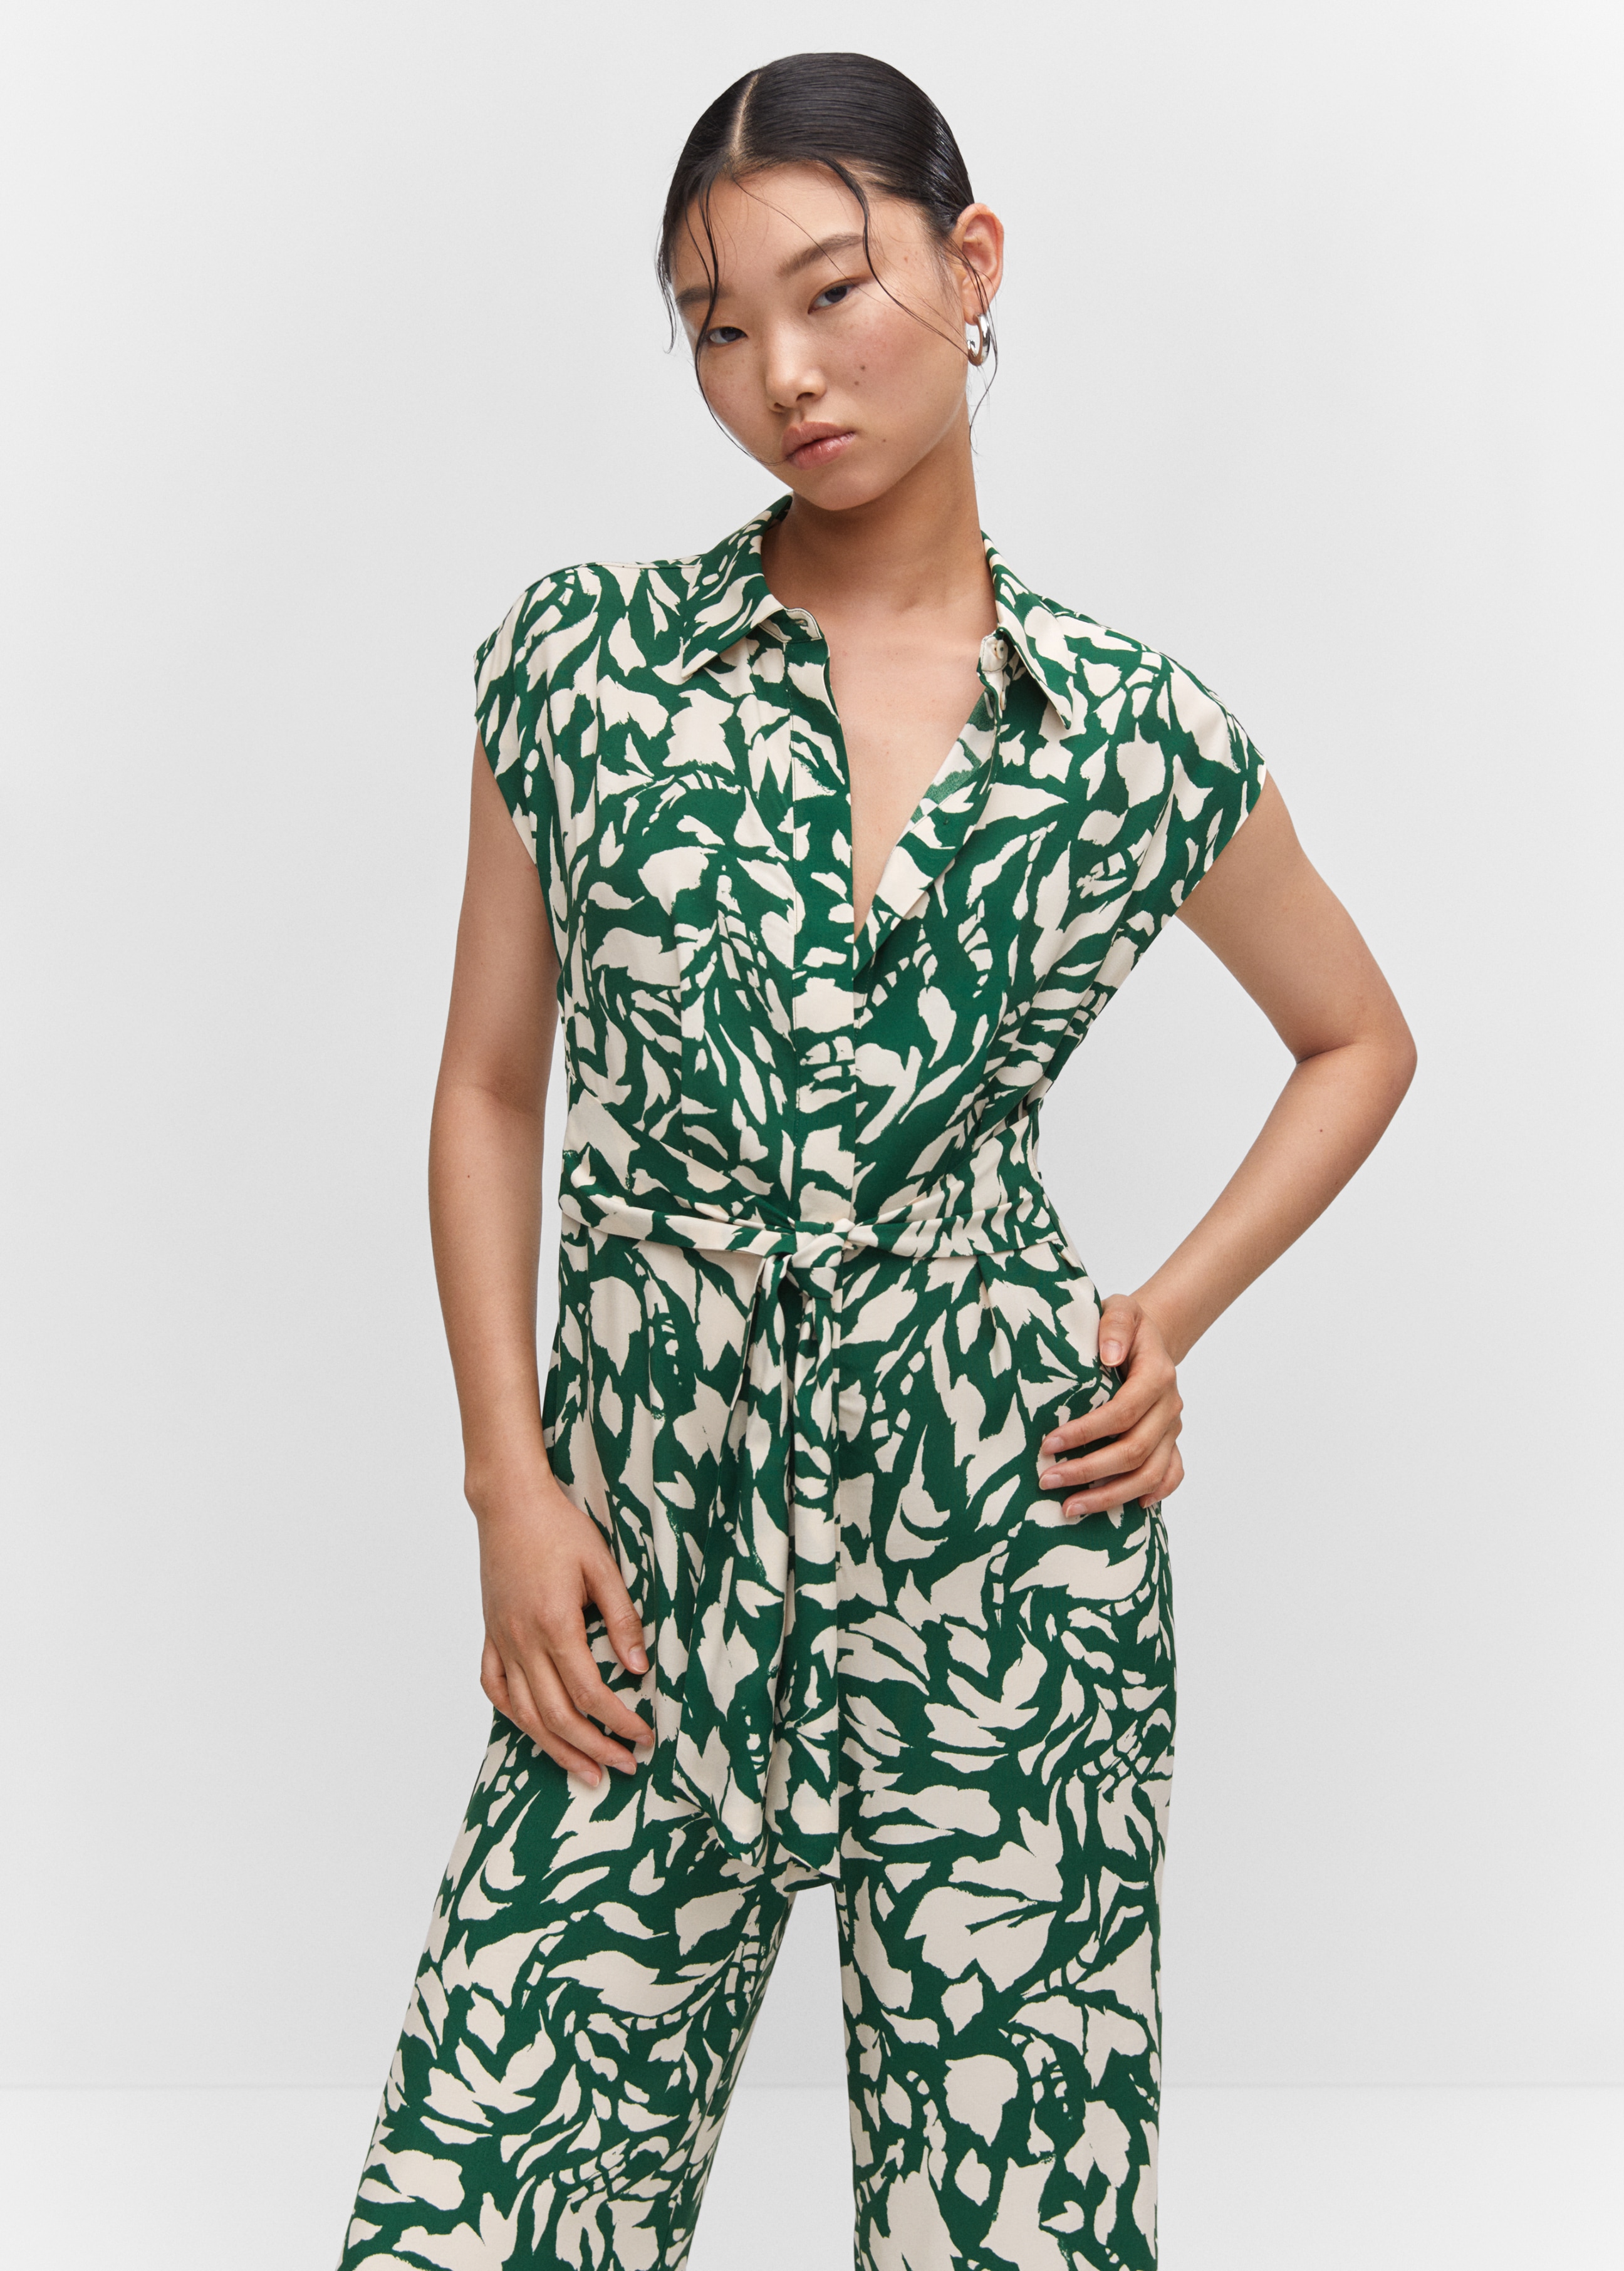 Printed jumpsuit with bow - Medium plane